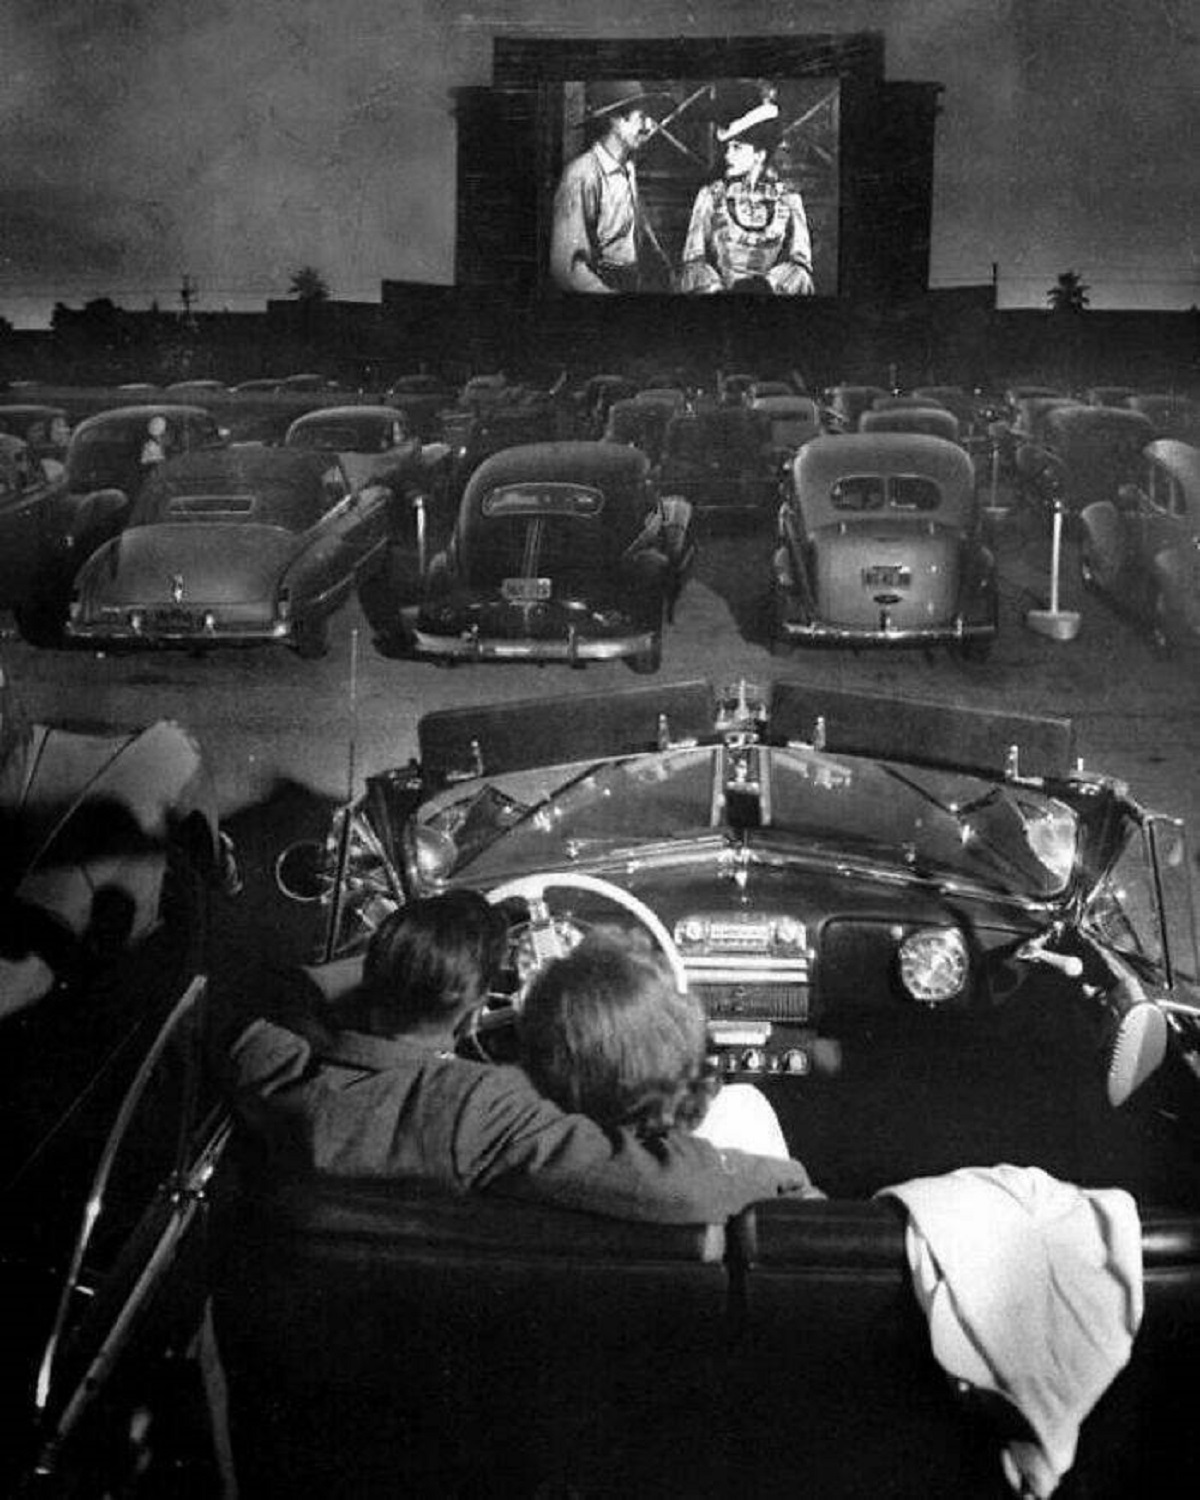 "Drive-In Theater, Los Angeles, 1949"